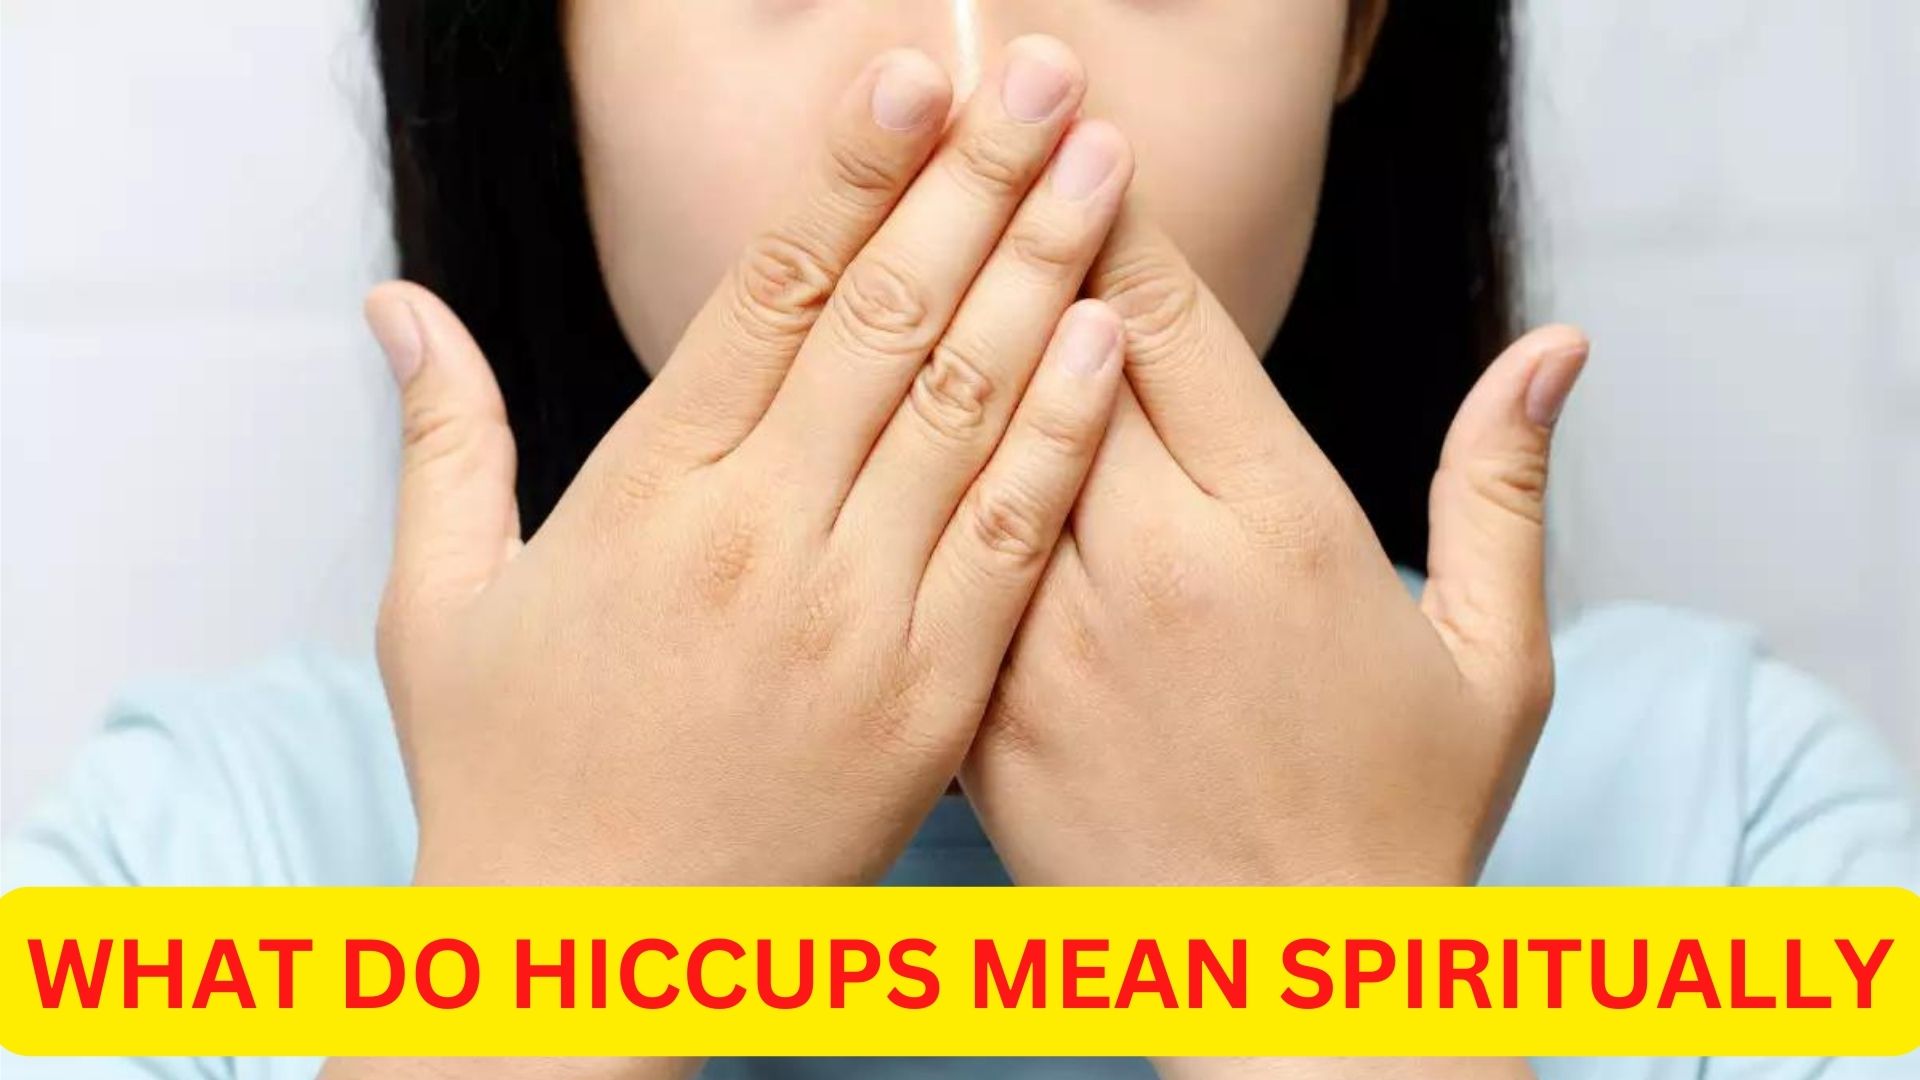 What Do Hiccups Mean Spiritually?